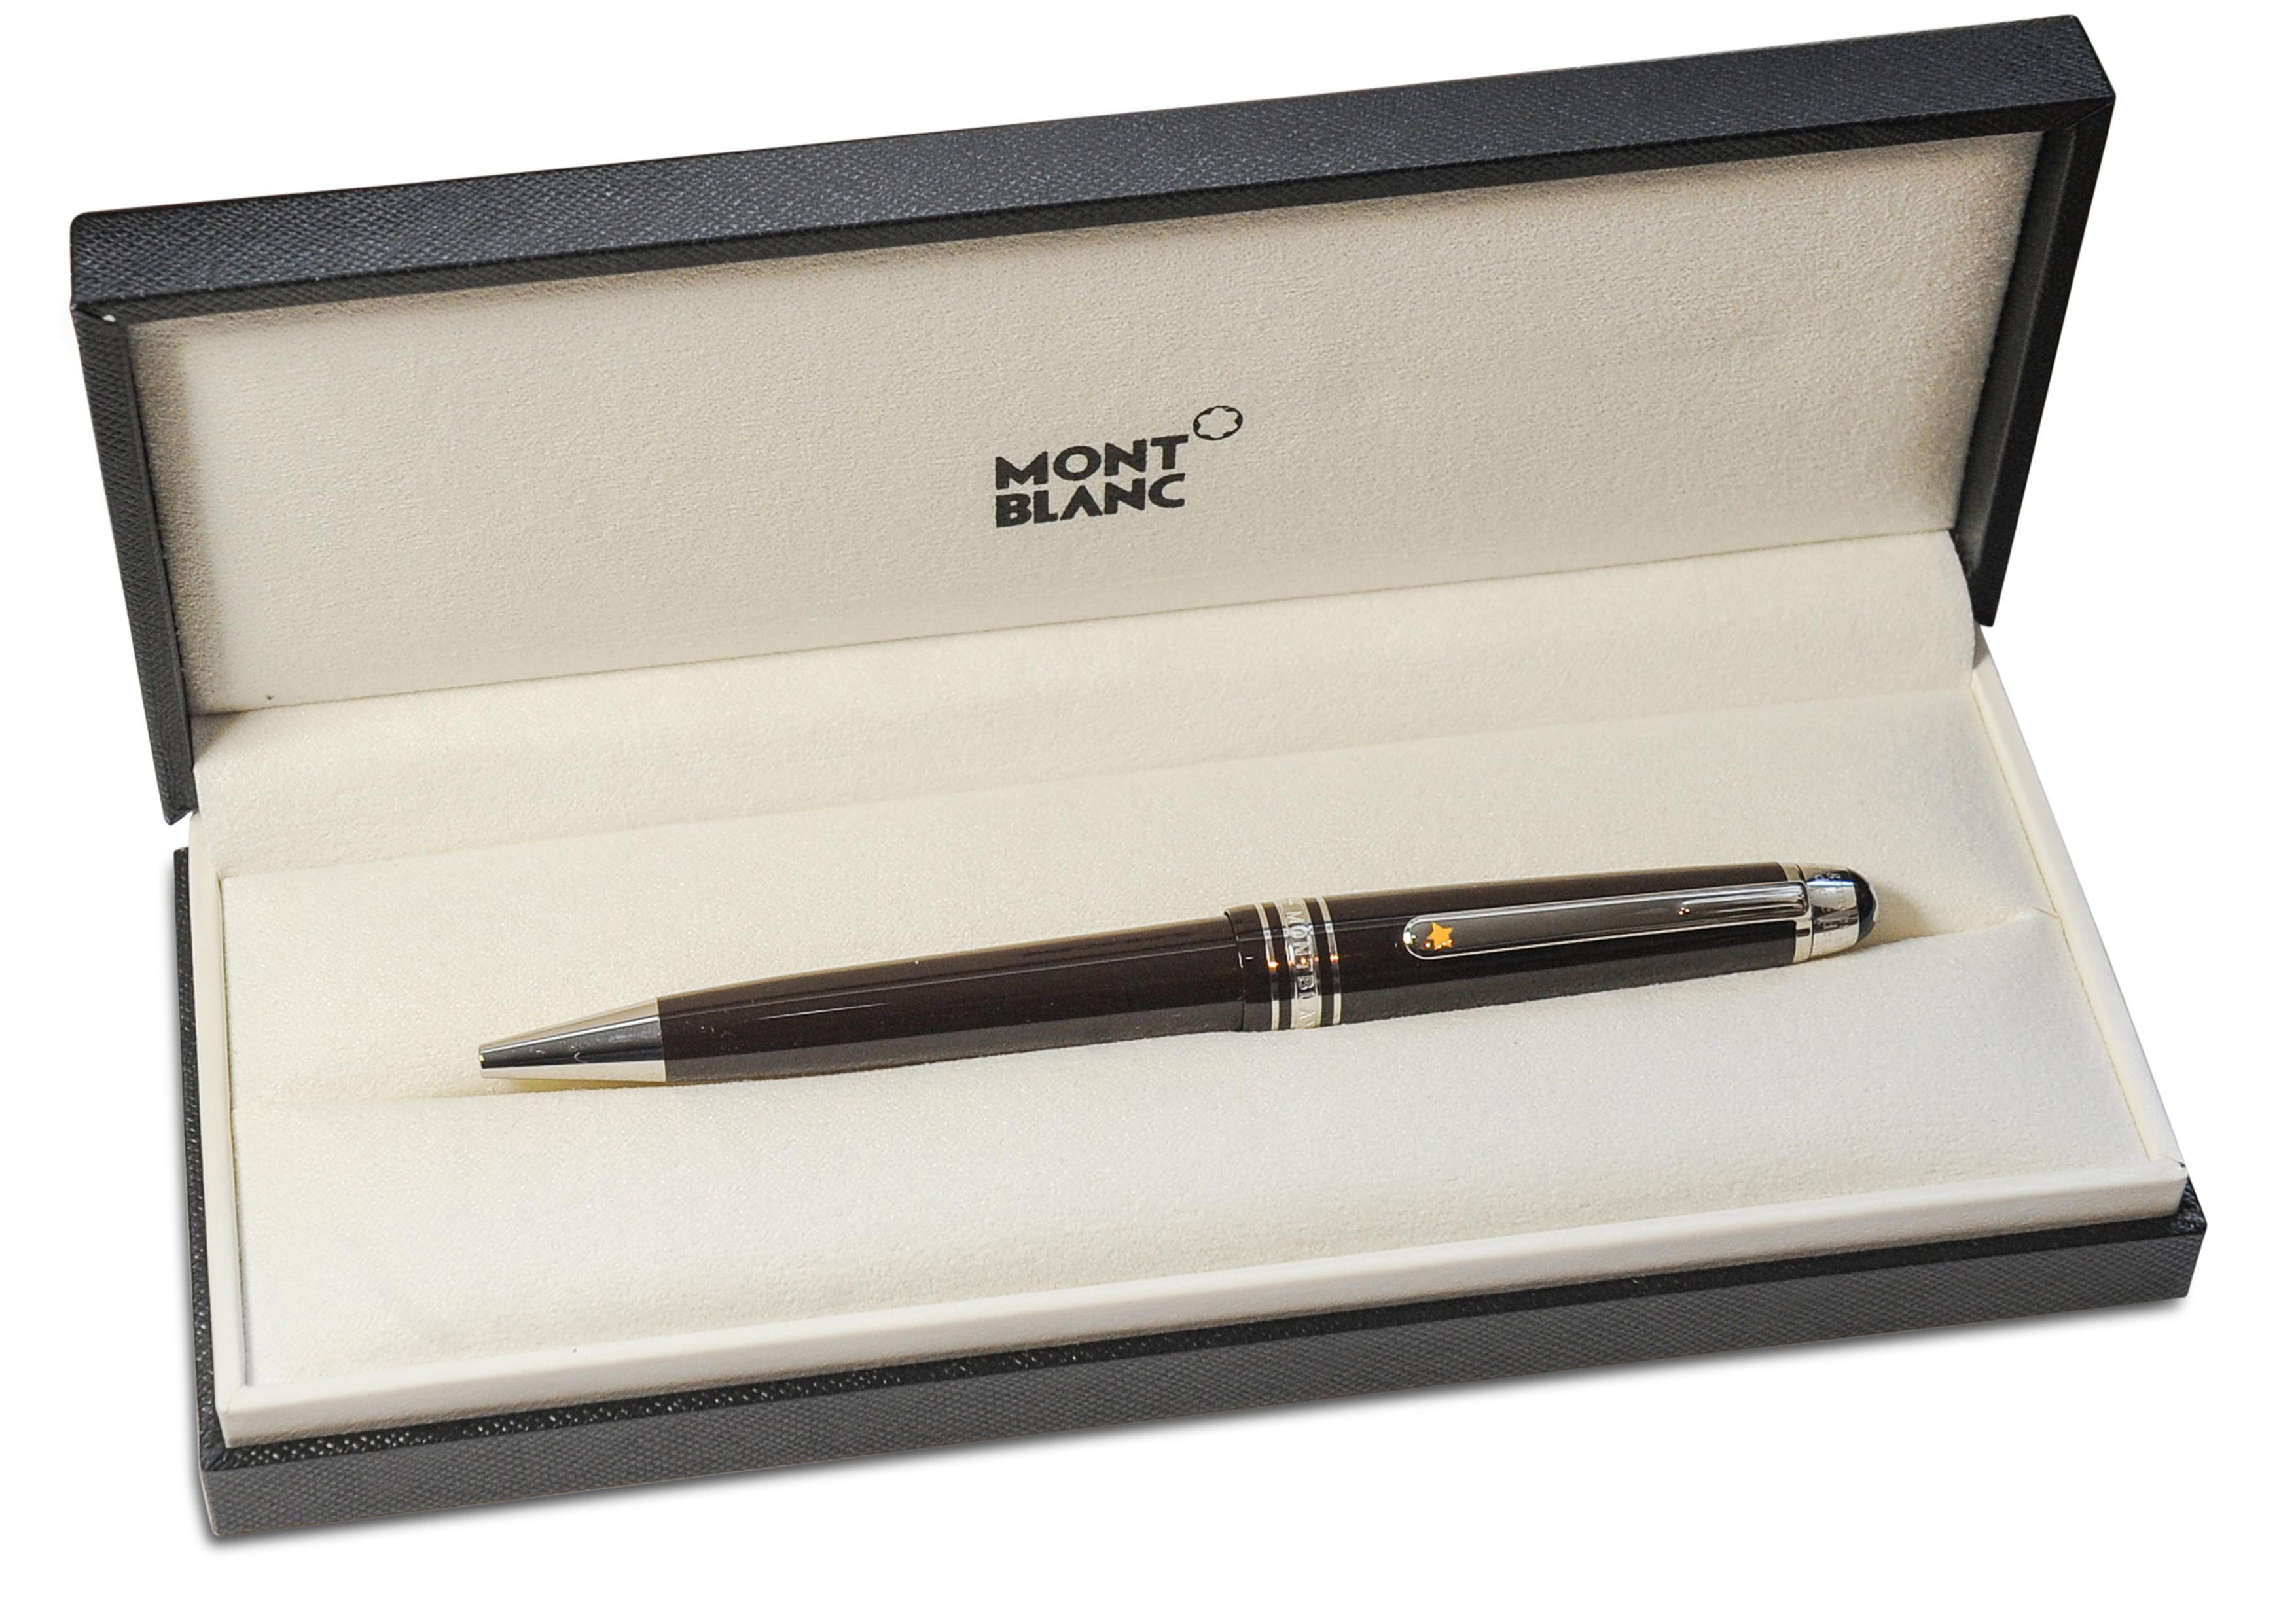 Special Edition Montblanc Meisterstück Le Petit Prince & Aviator. The barrel and cap of the ballpoint are made of brown precious resin. The clip is the same as the clips from the Le Petit Prince & Fox editions, it has a yellow lacquered star on it.